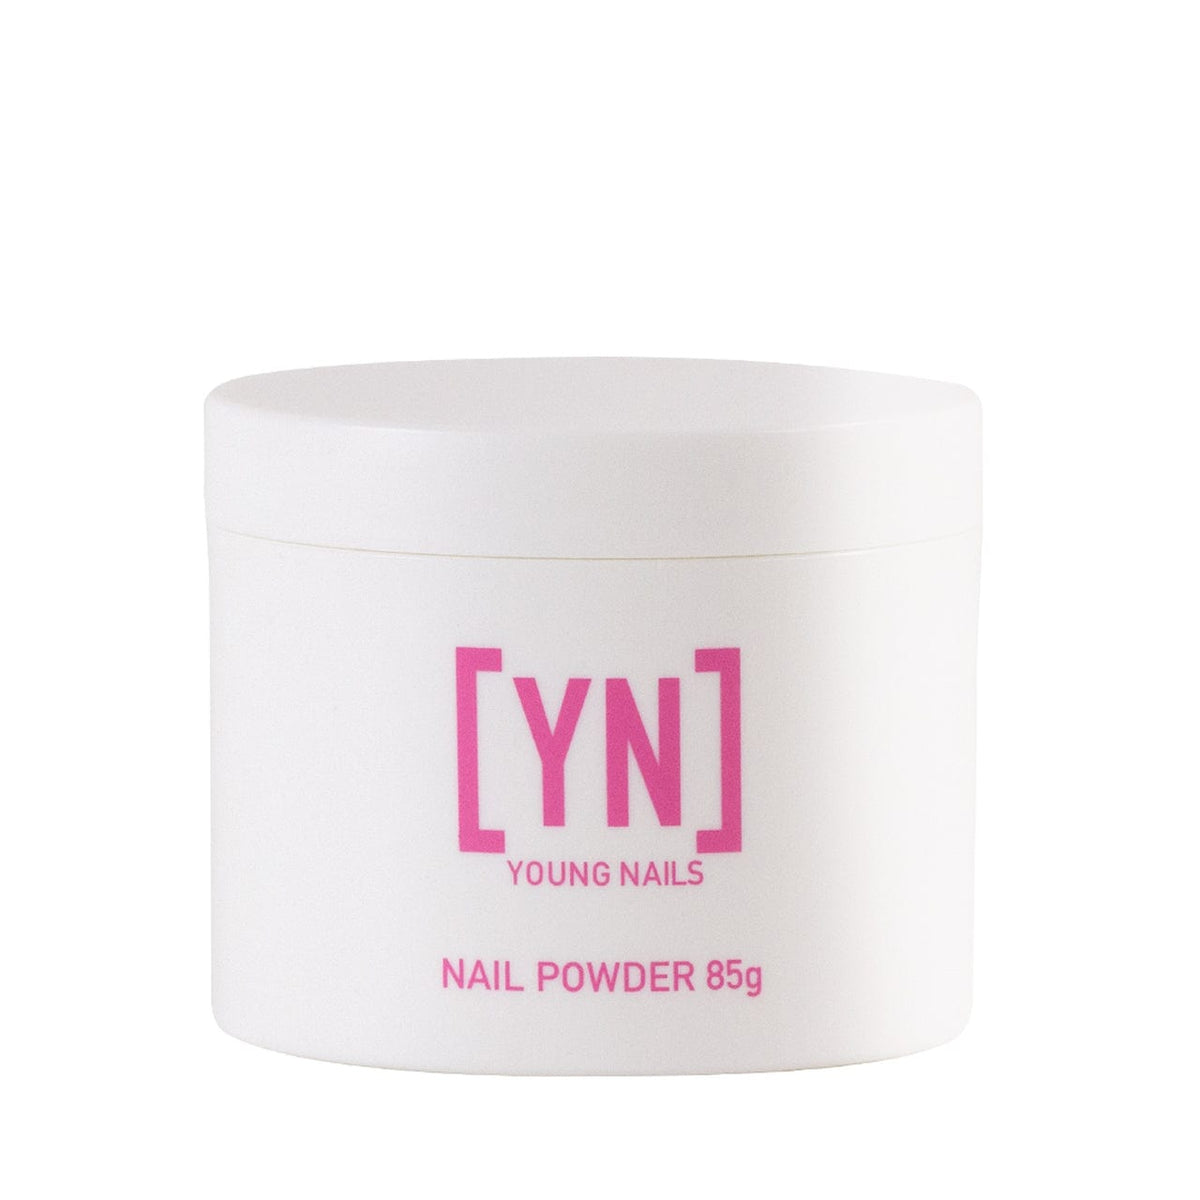 85g Speed White Powder Nails - Young Nails - Luxe Pacifique